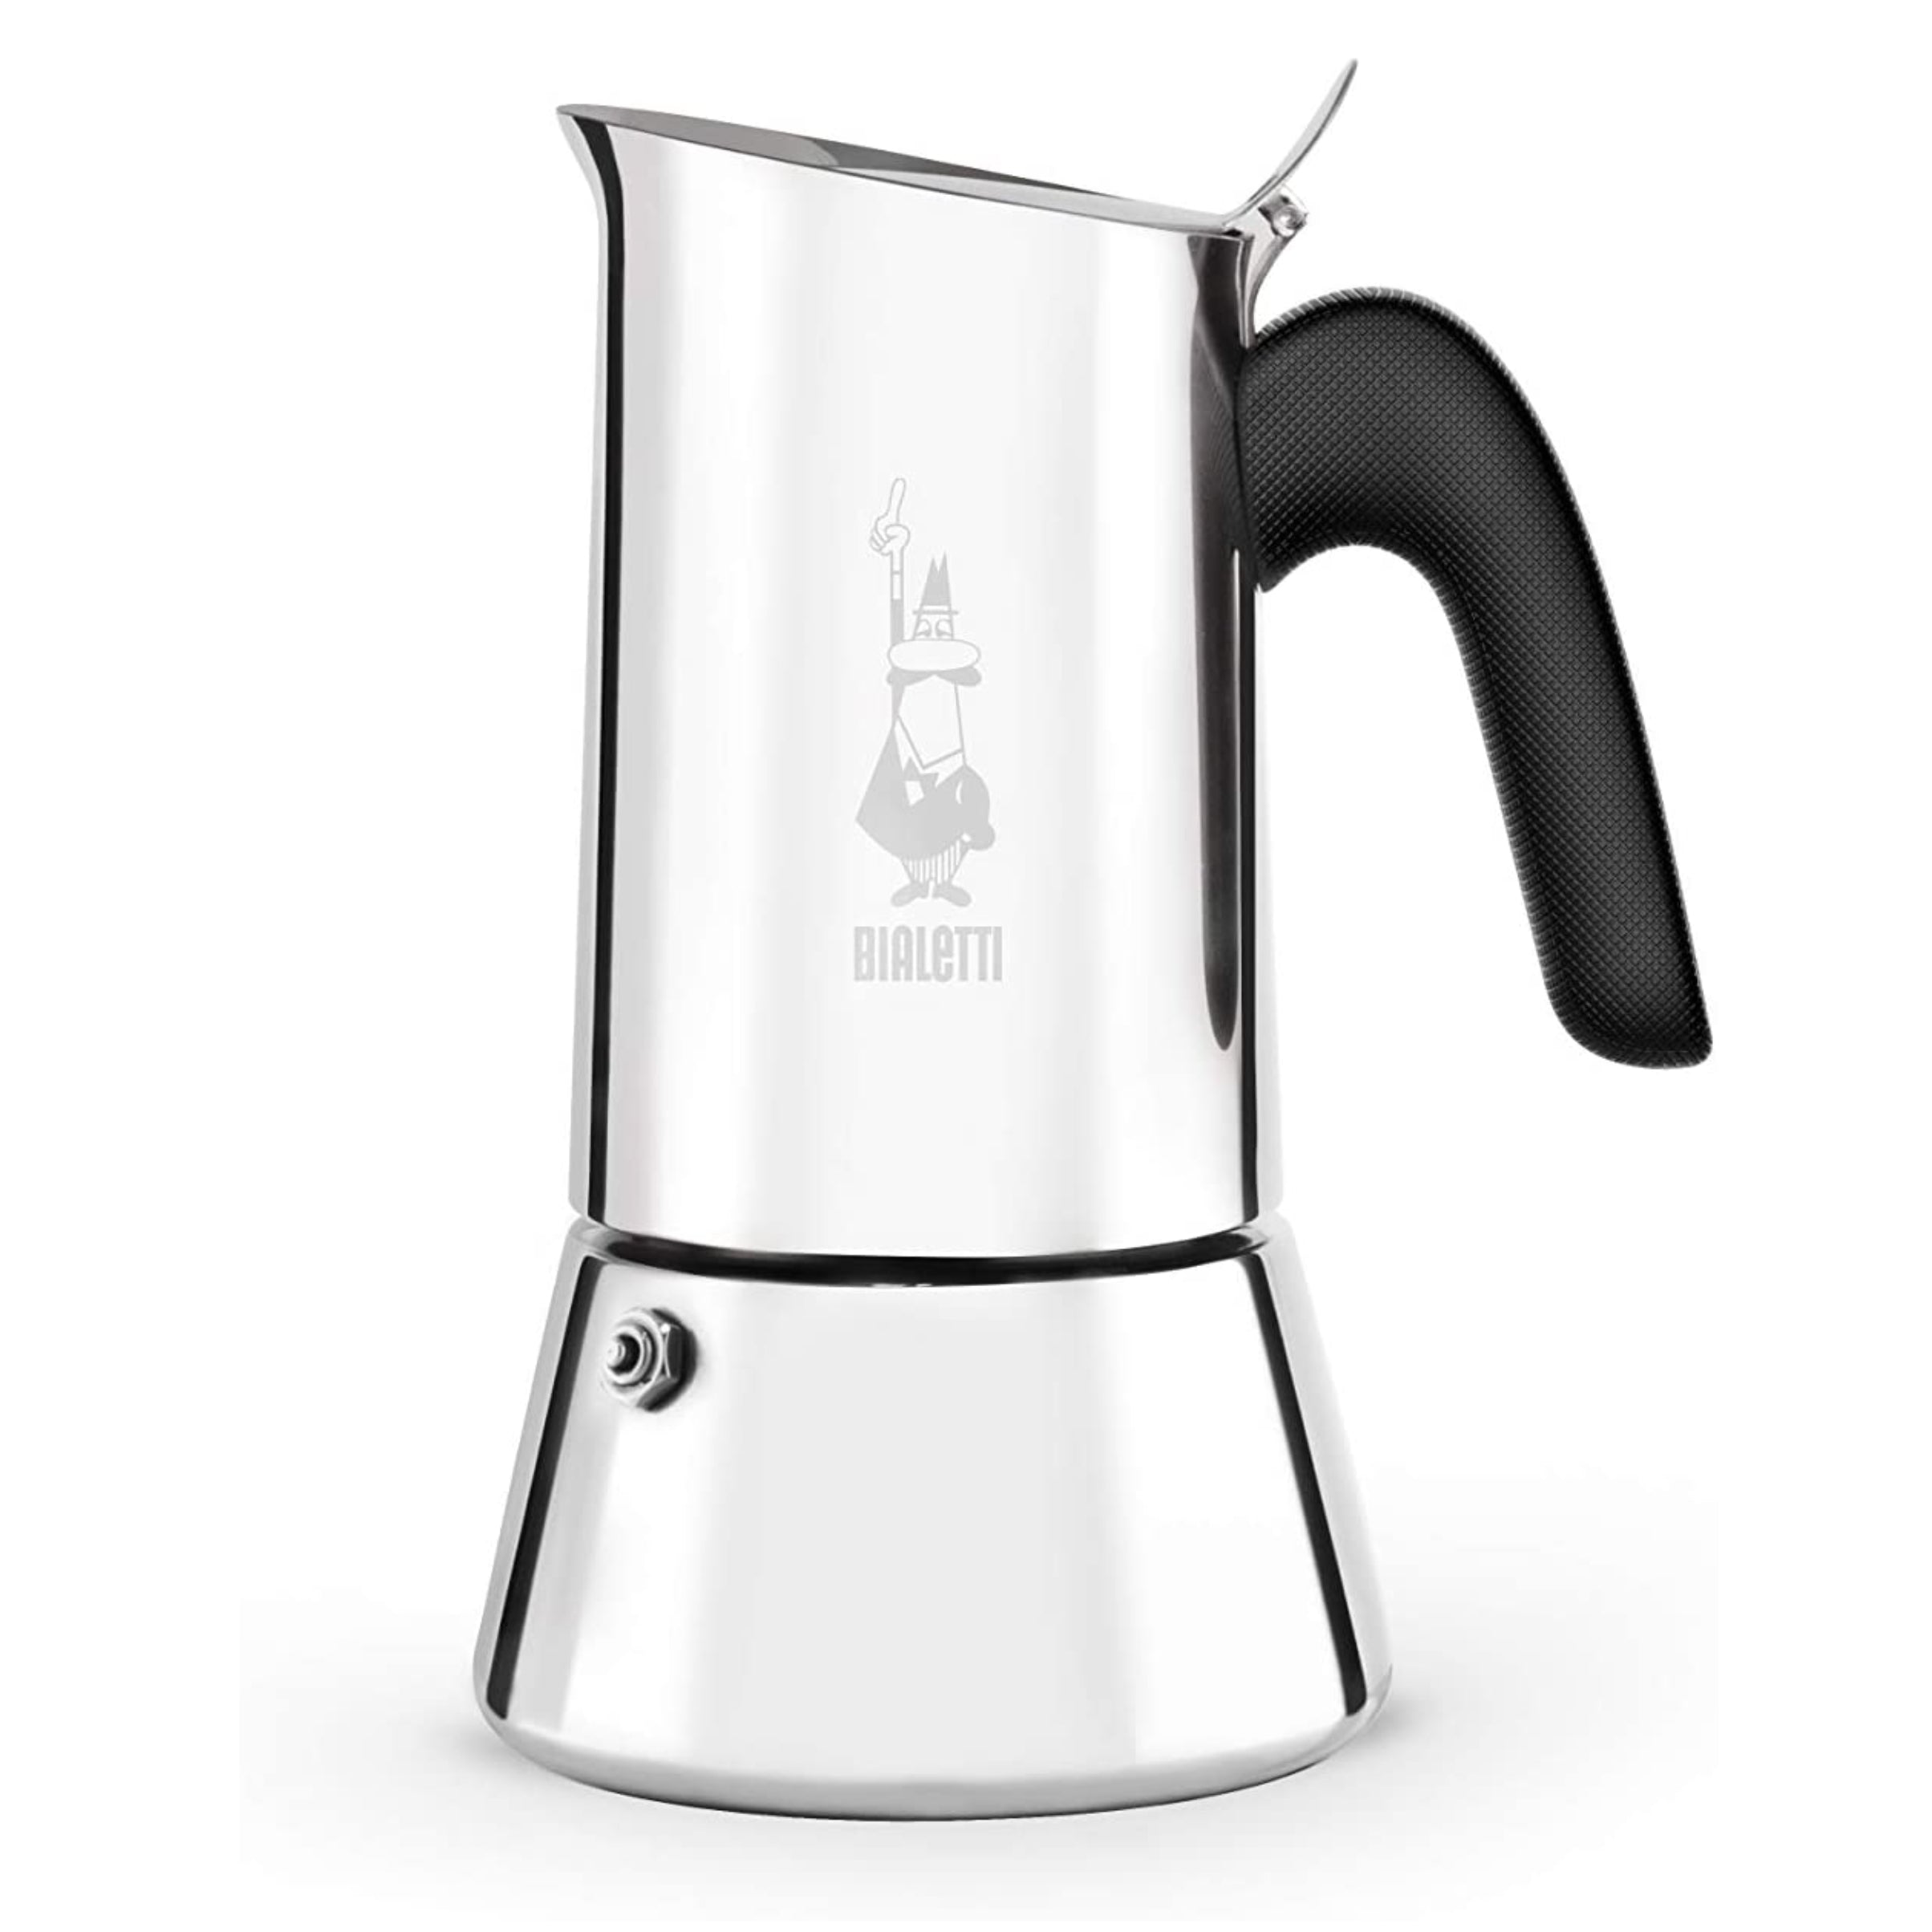 Bialetti Venus Stainless Steel Stovetop Espresso Coffee Maker – 6-Cup